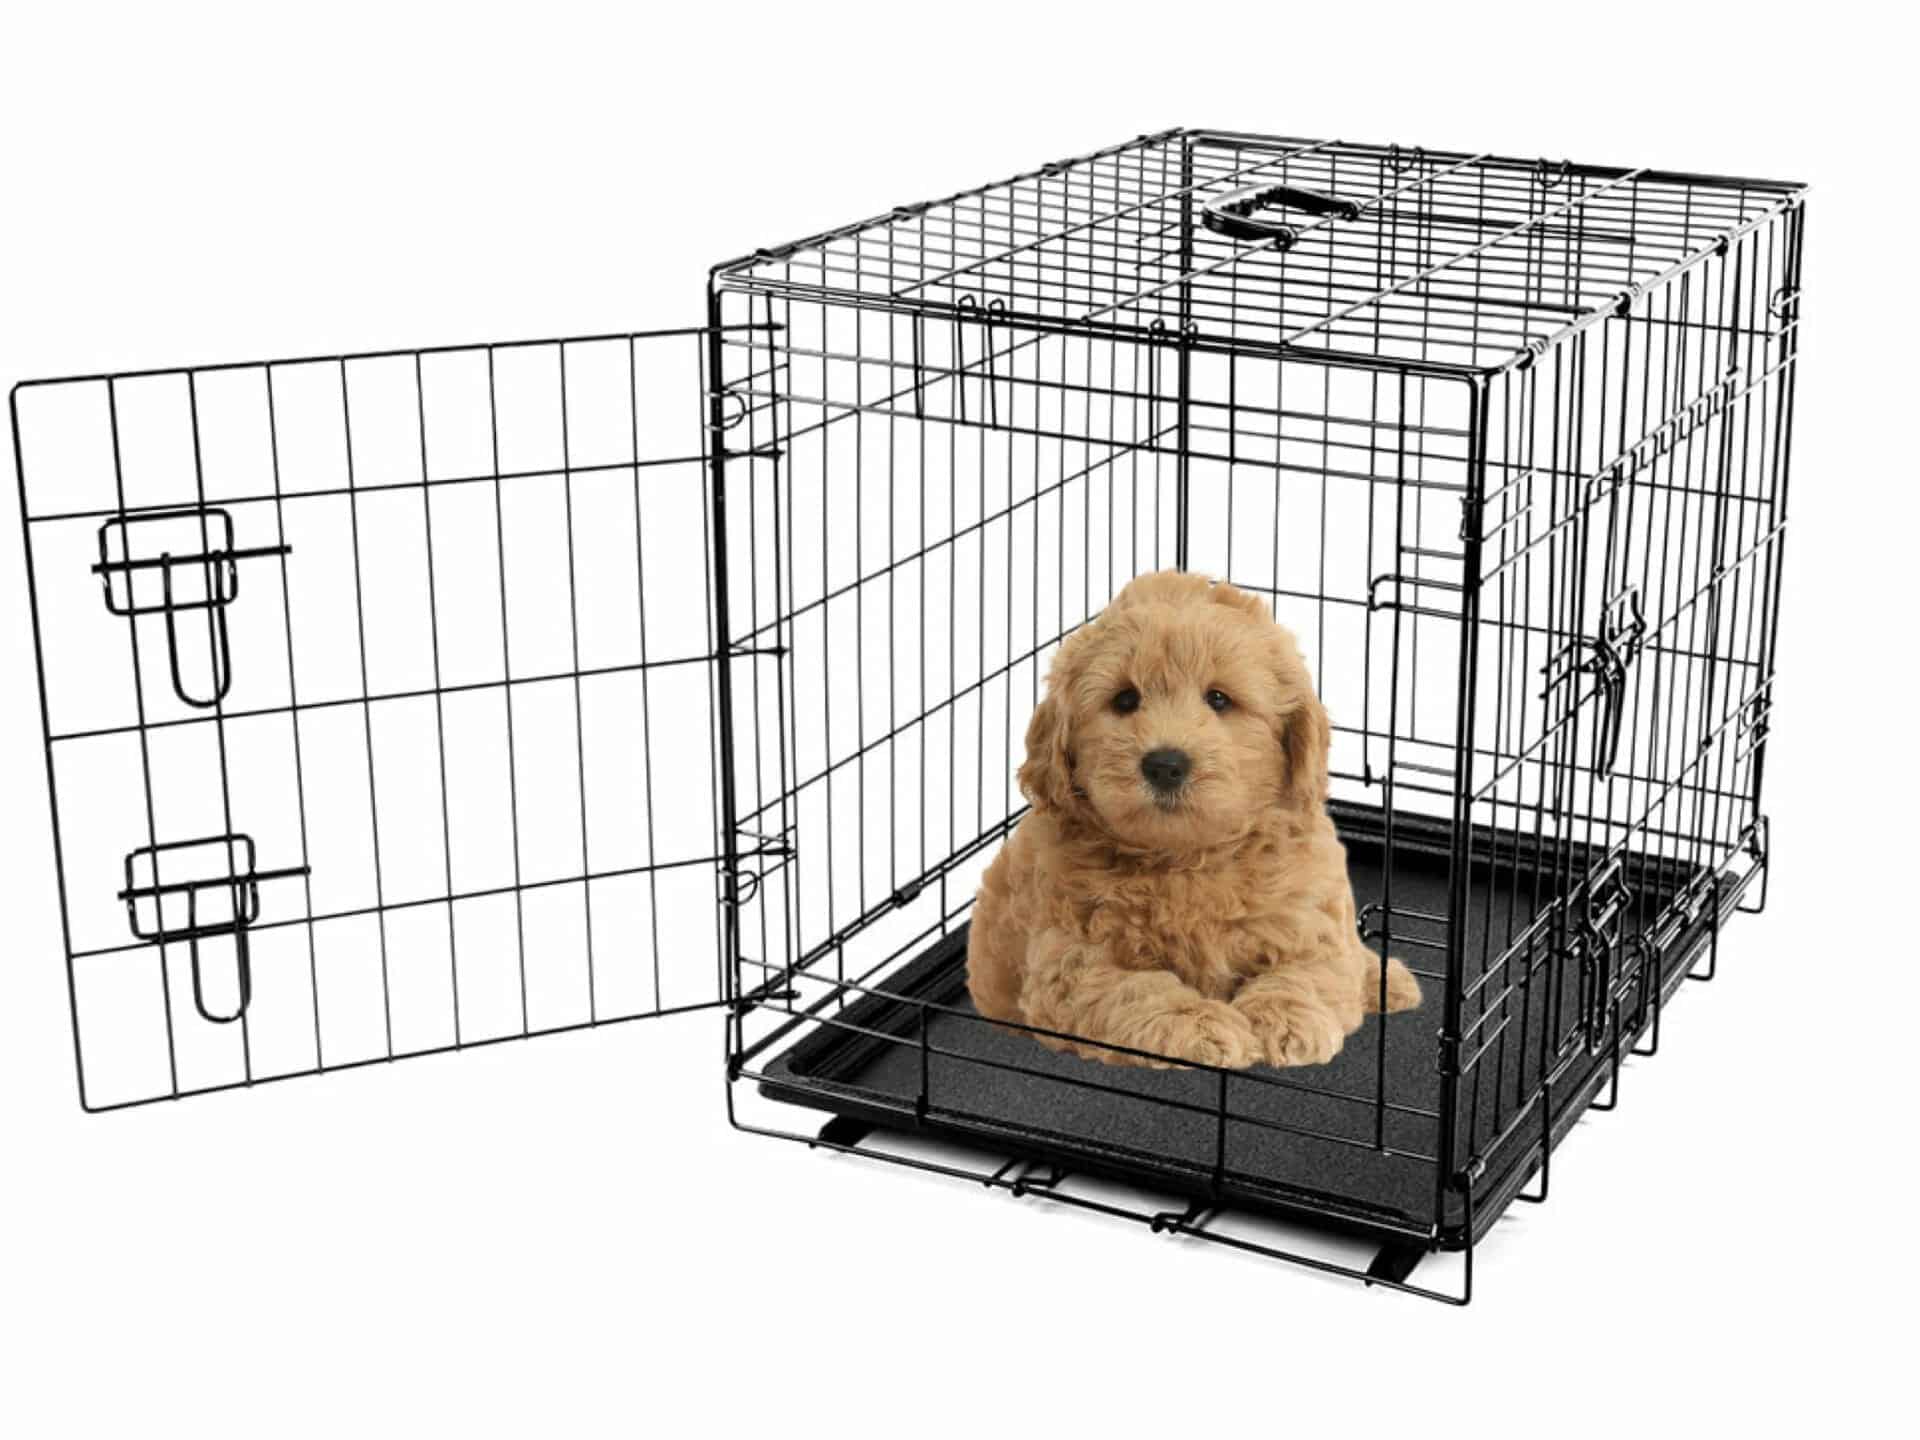 Crate training a Goldendoodle